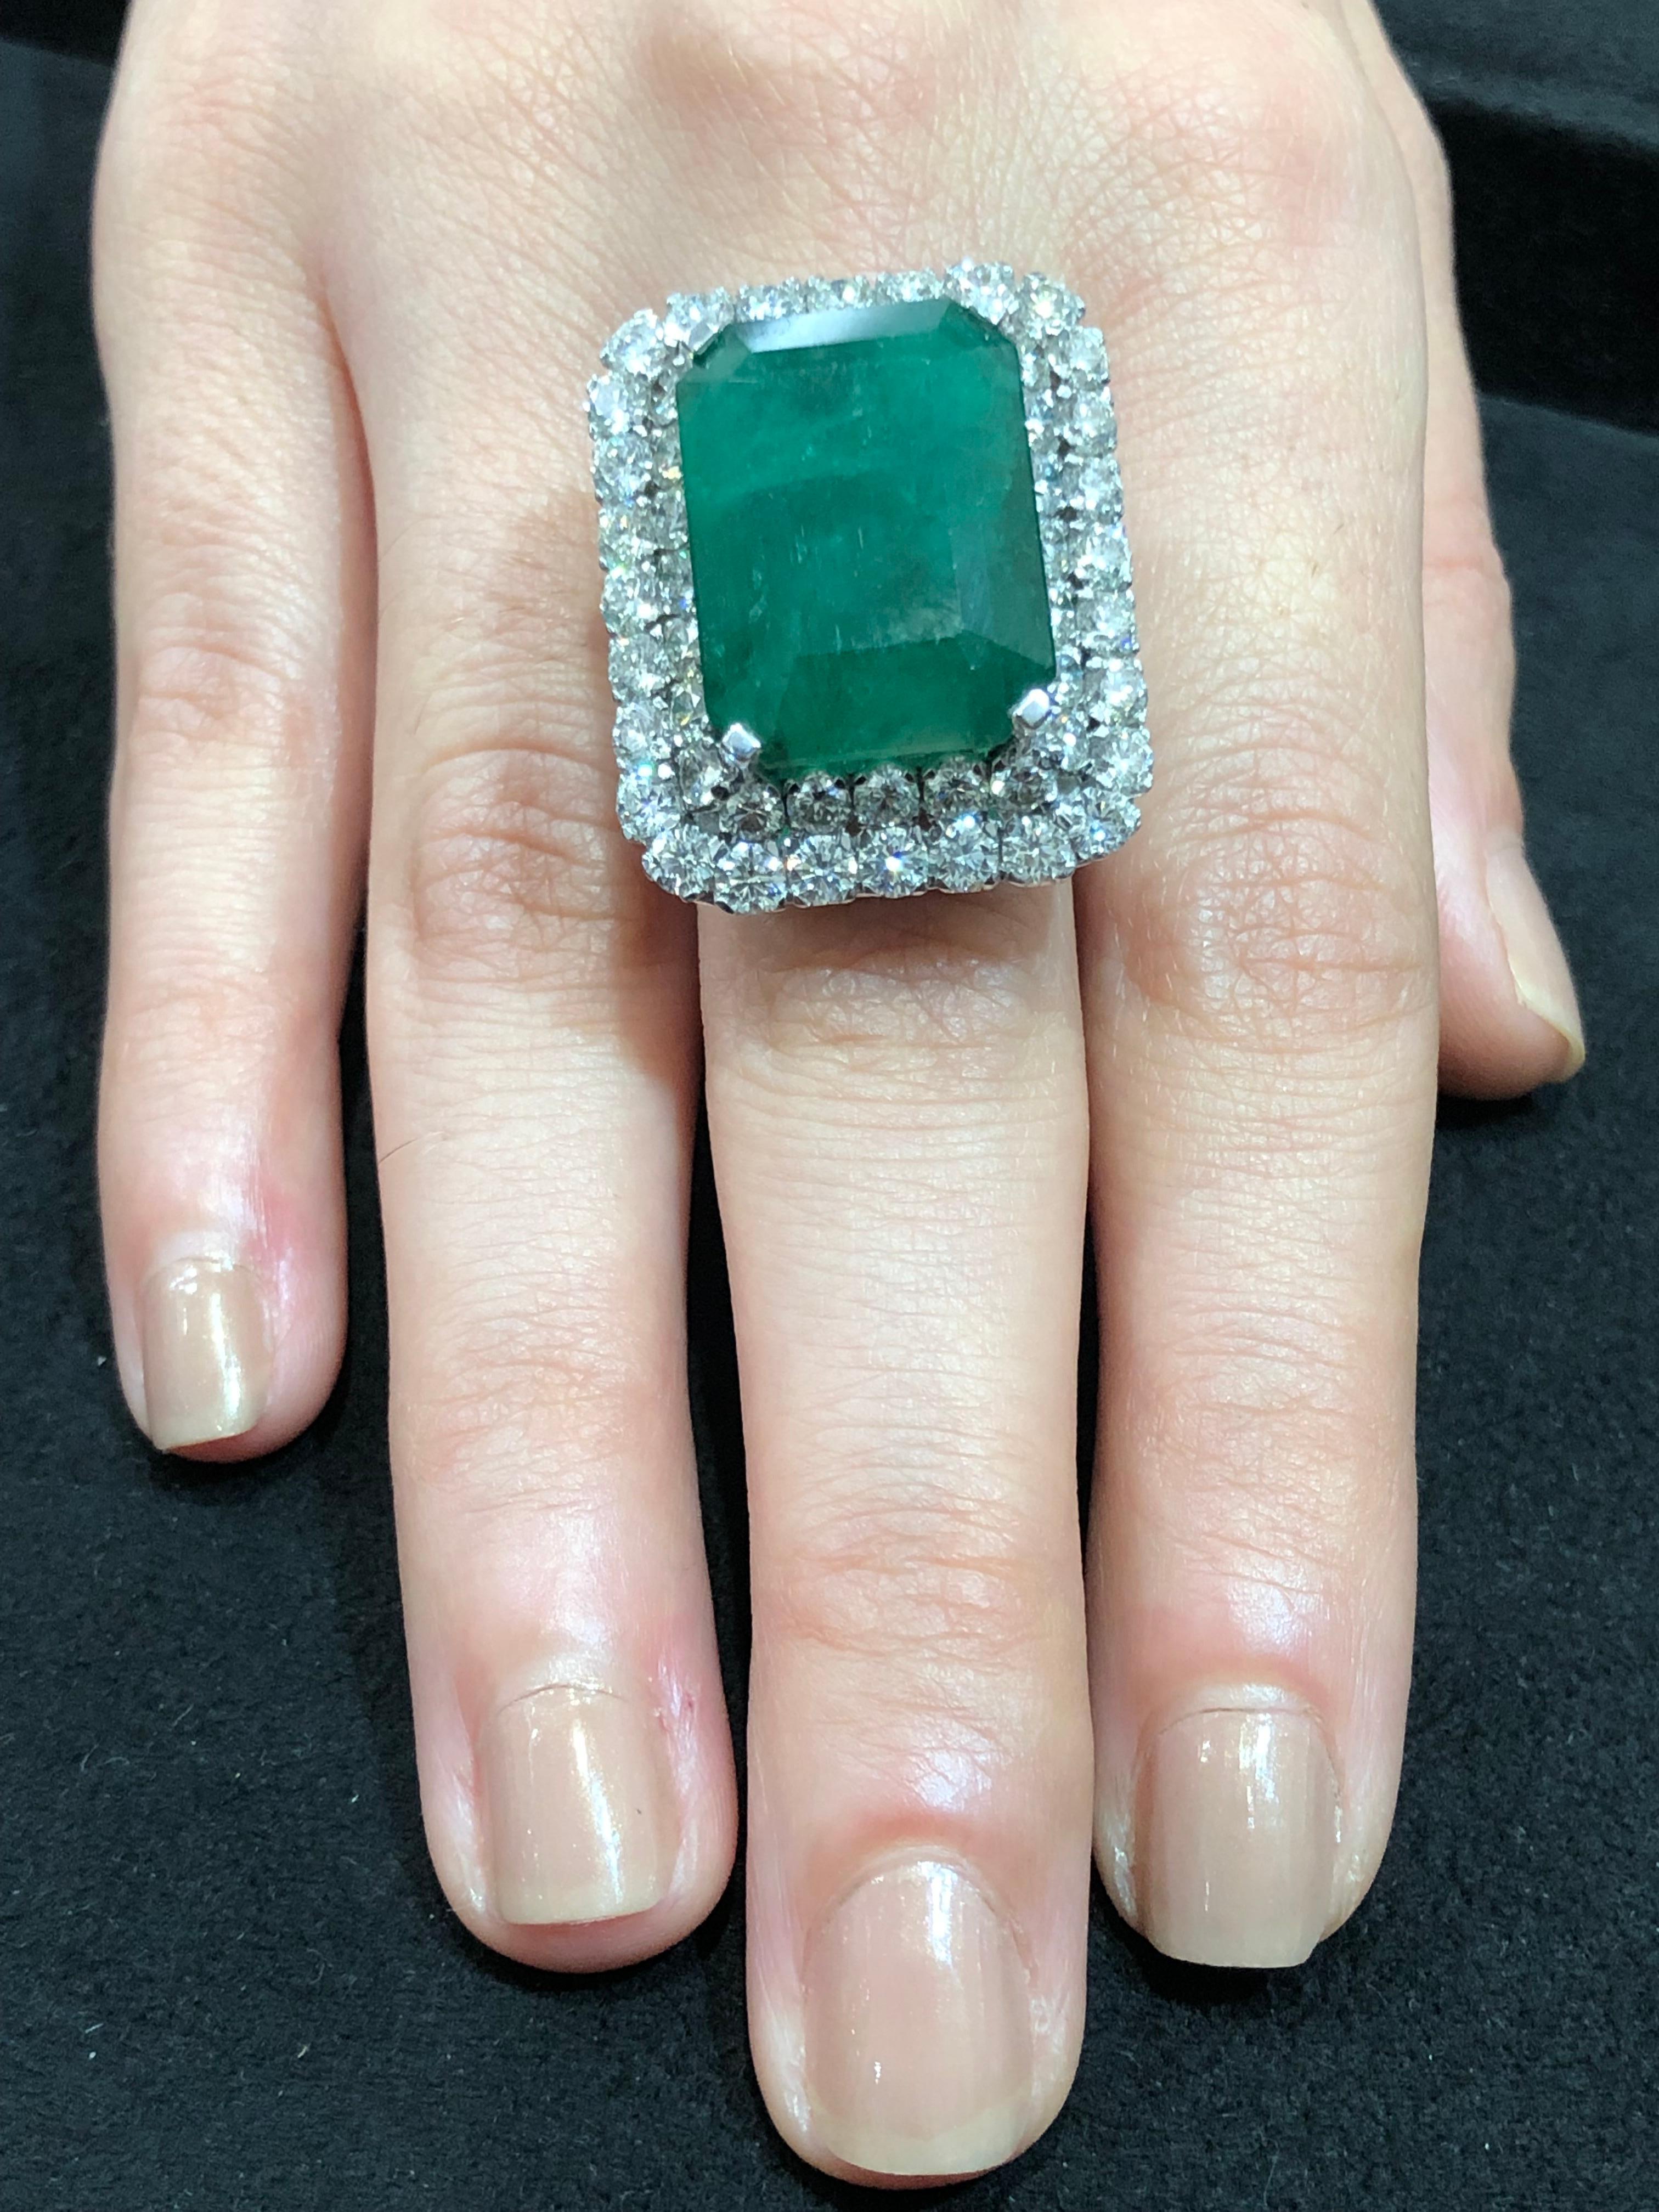 Diamonds: 4.84 carats
Emerald: 25.26 carats
18kt Gold: 14.000 grams
Ref No: DR-HCH

Cocktail rings becoming more and more glorious with natural emeralds and diamonds.